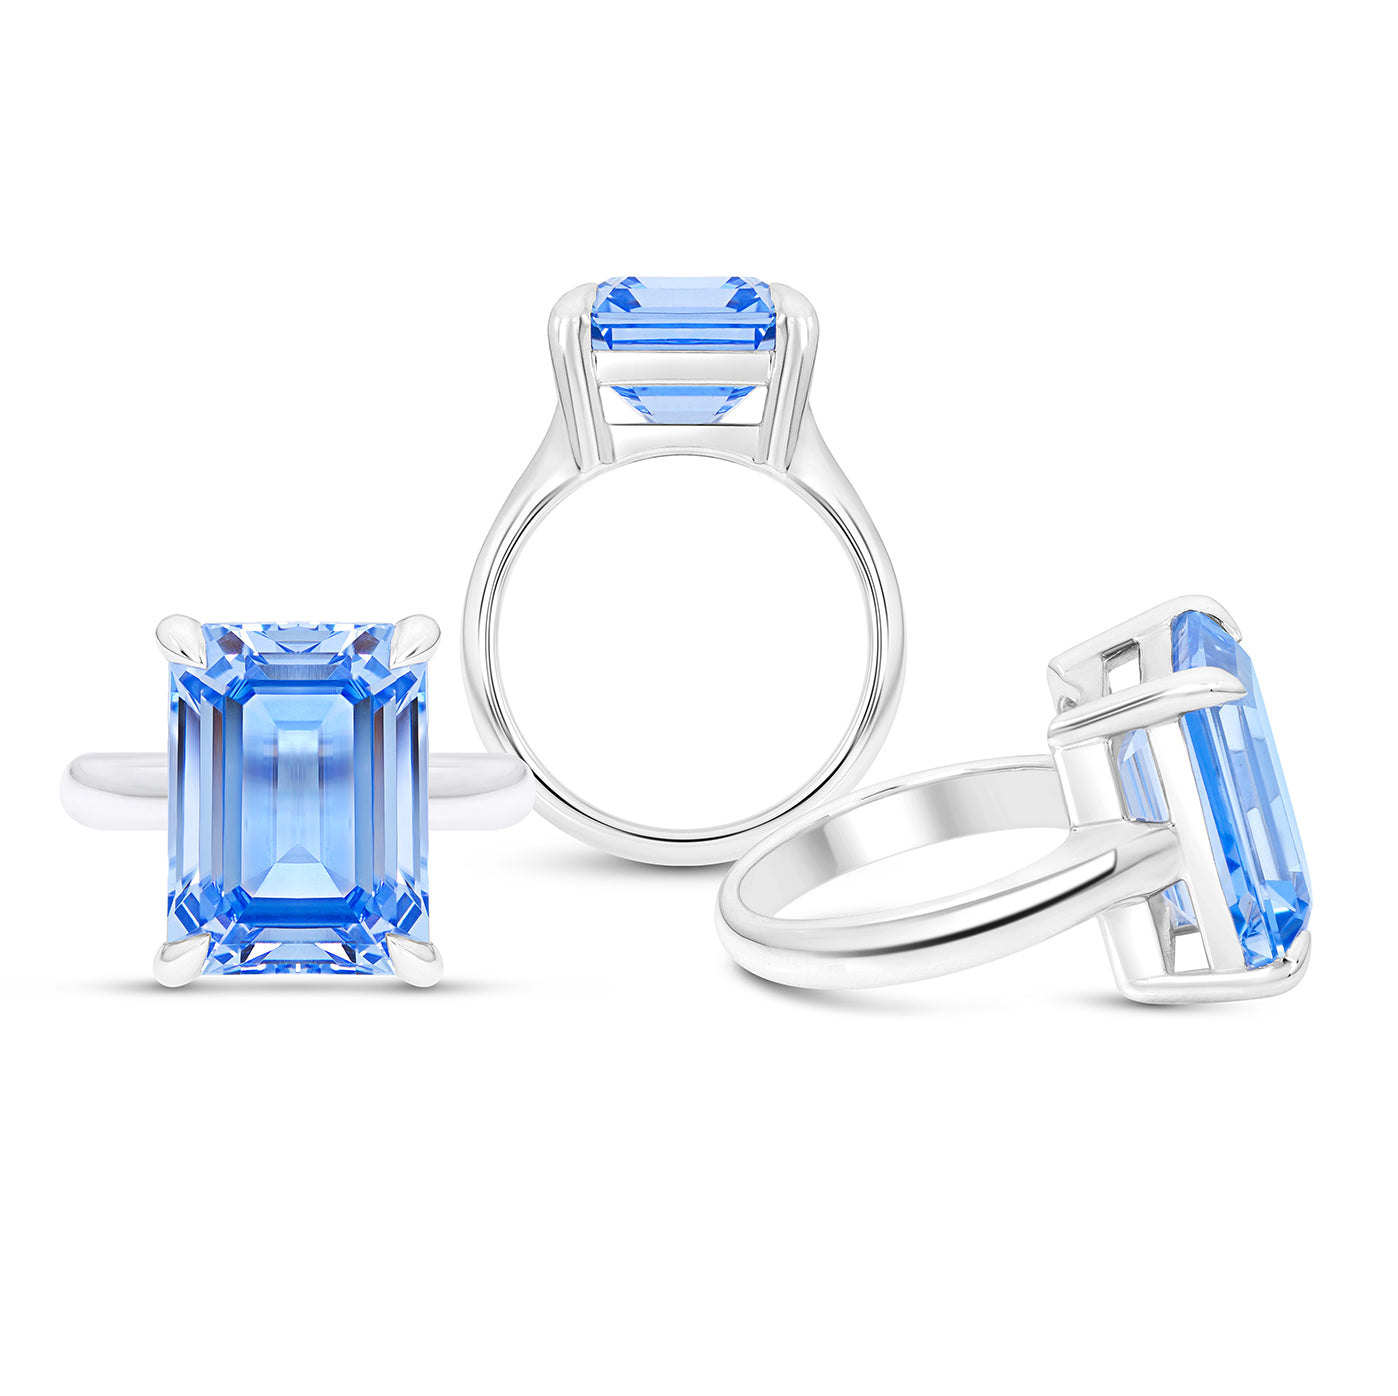 Blue Spinel Empire Ring